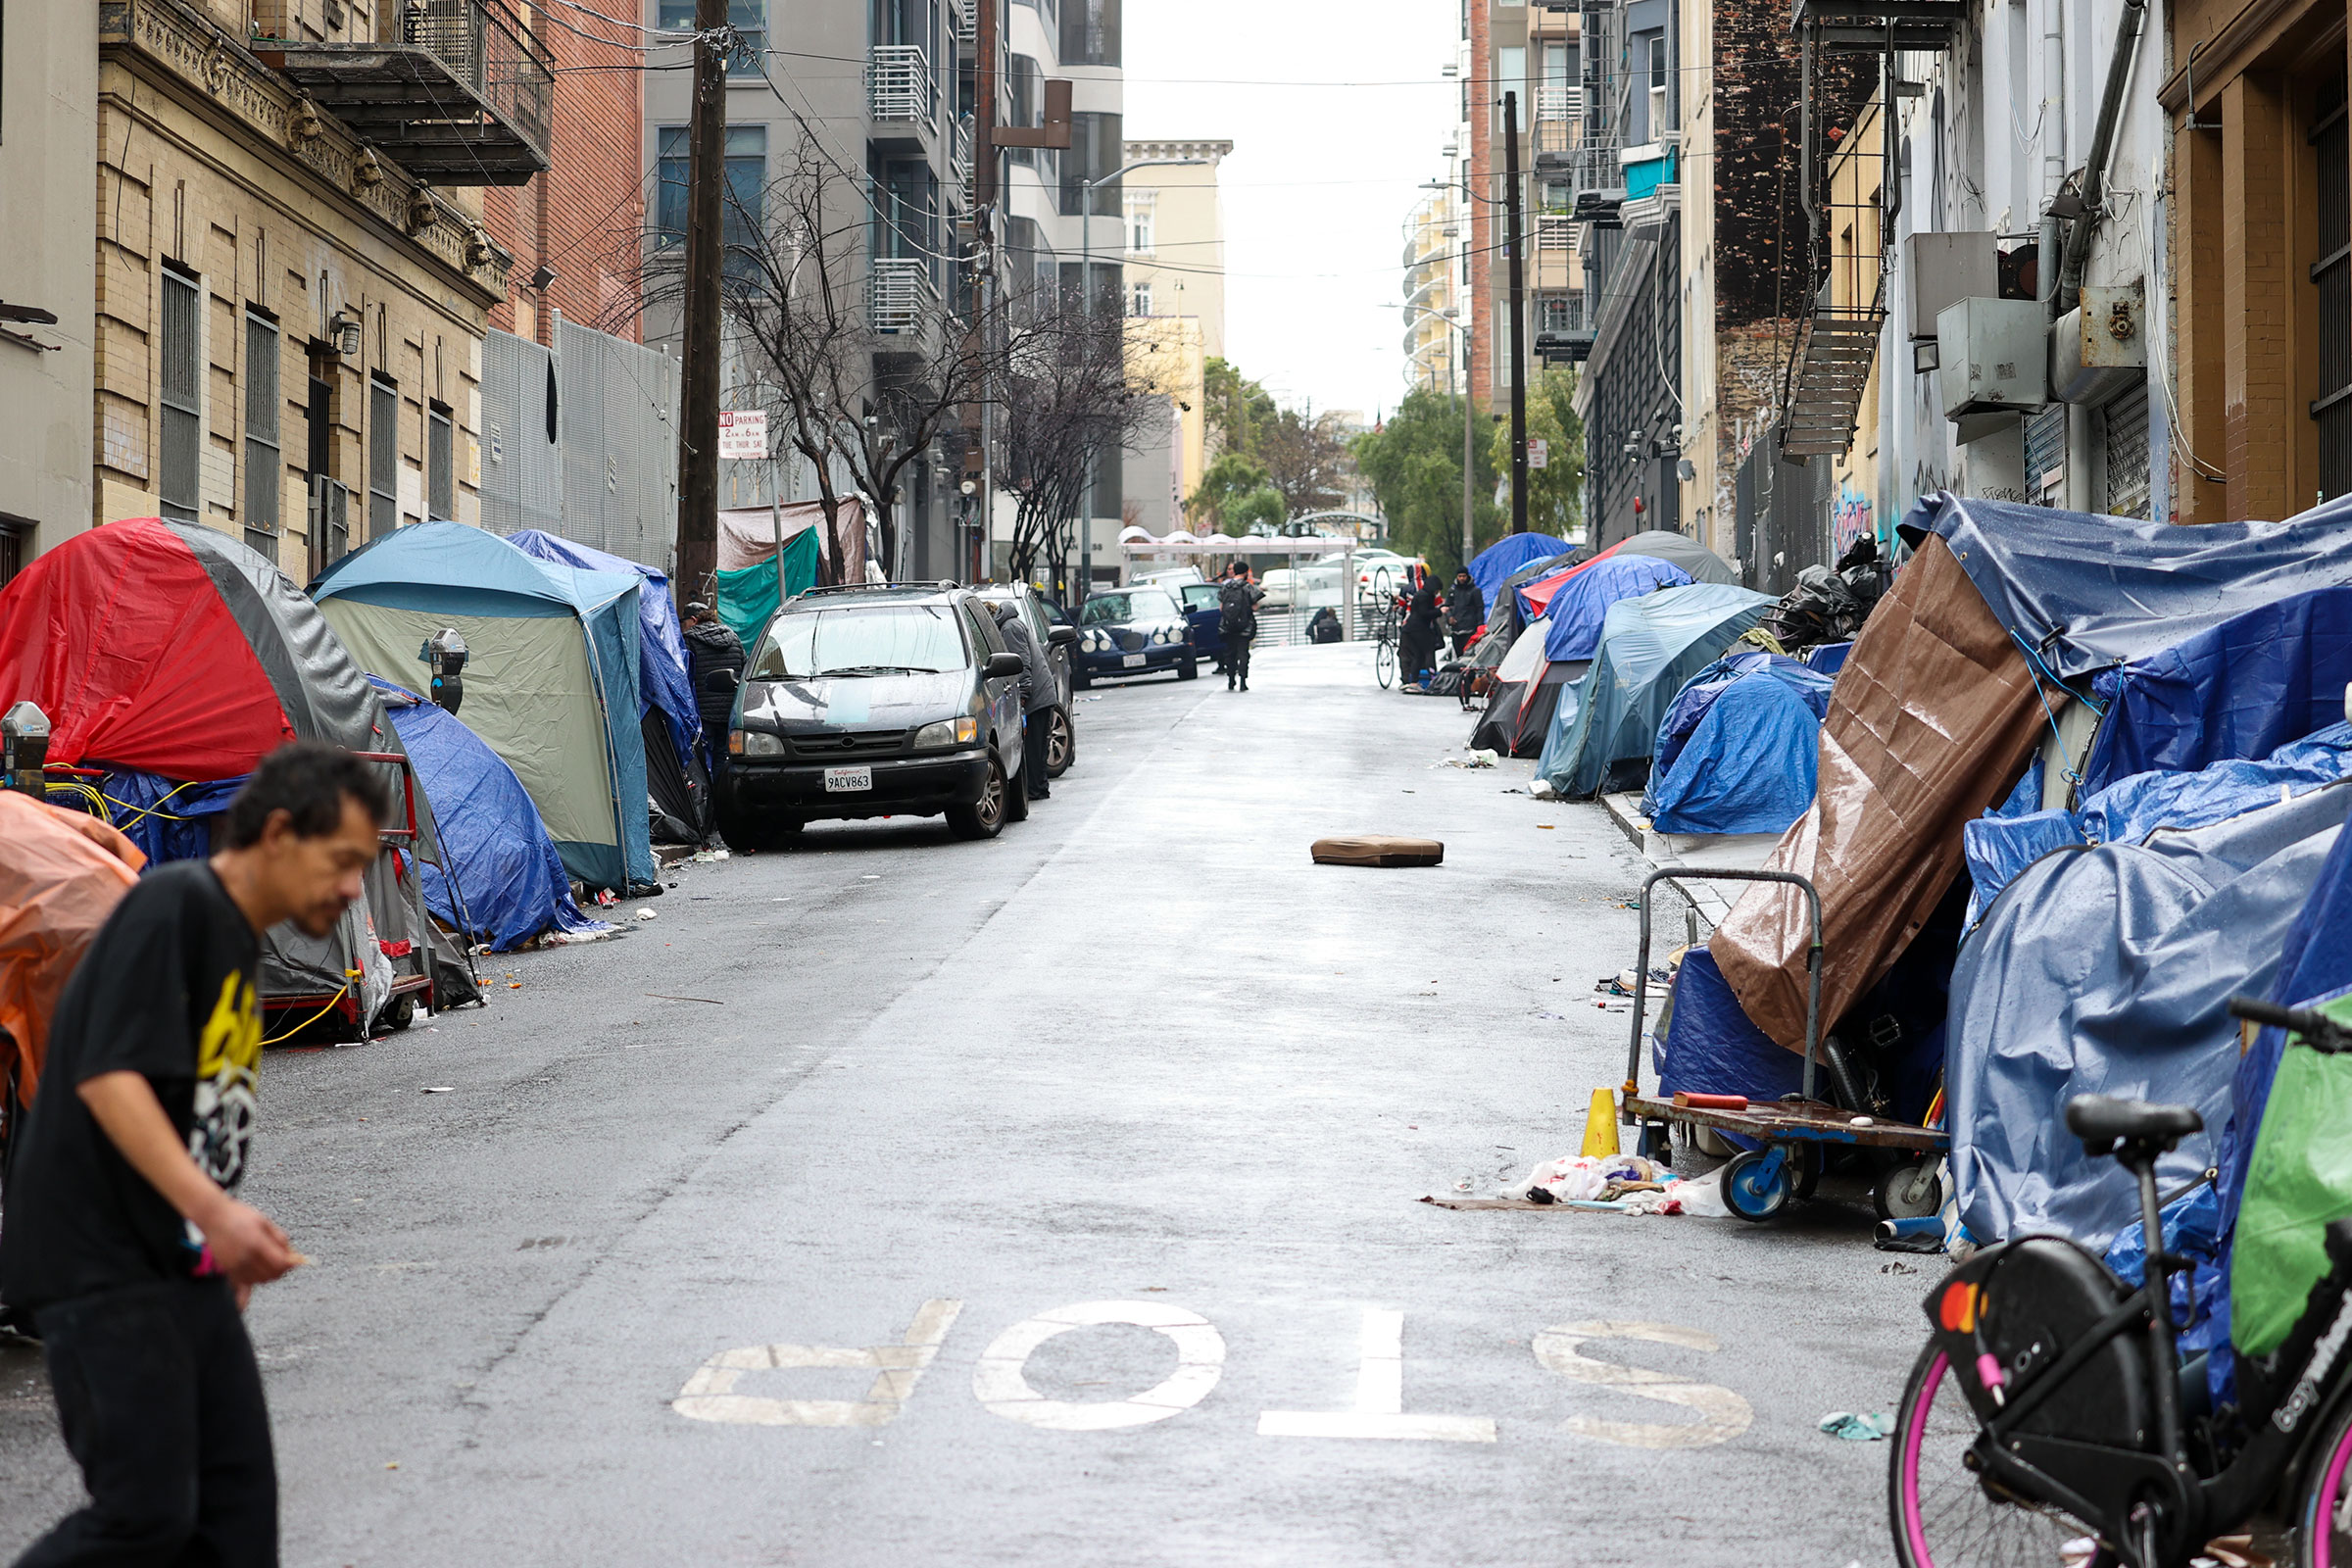 Speaking out for homelessness - The Roundup